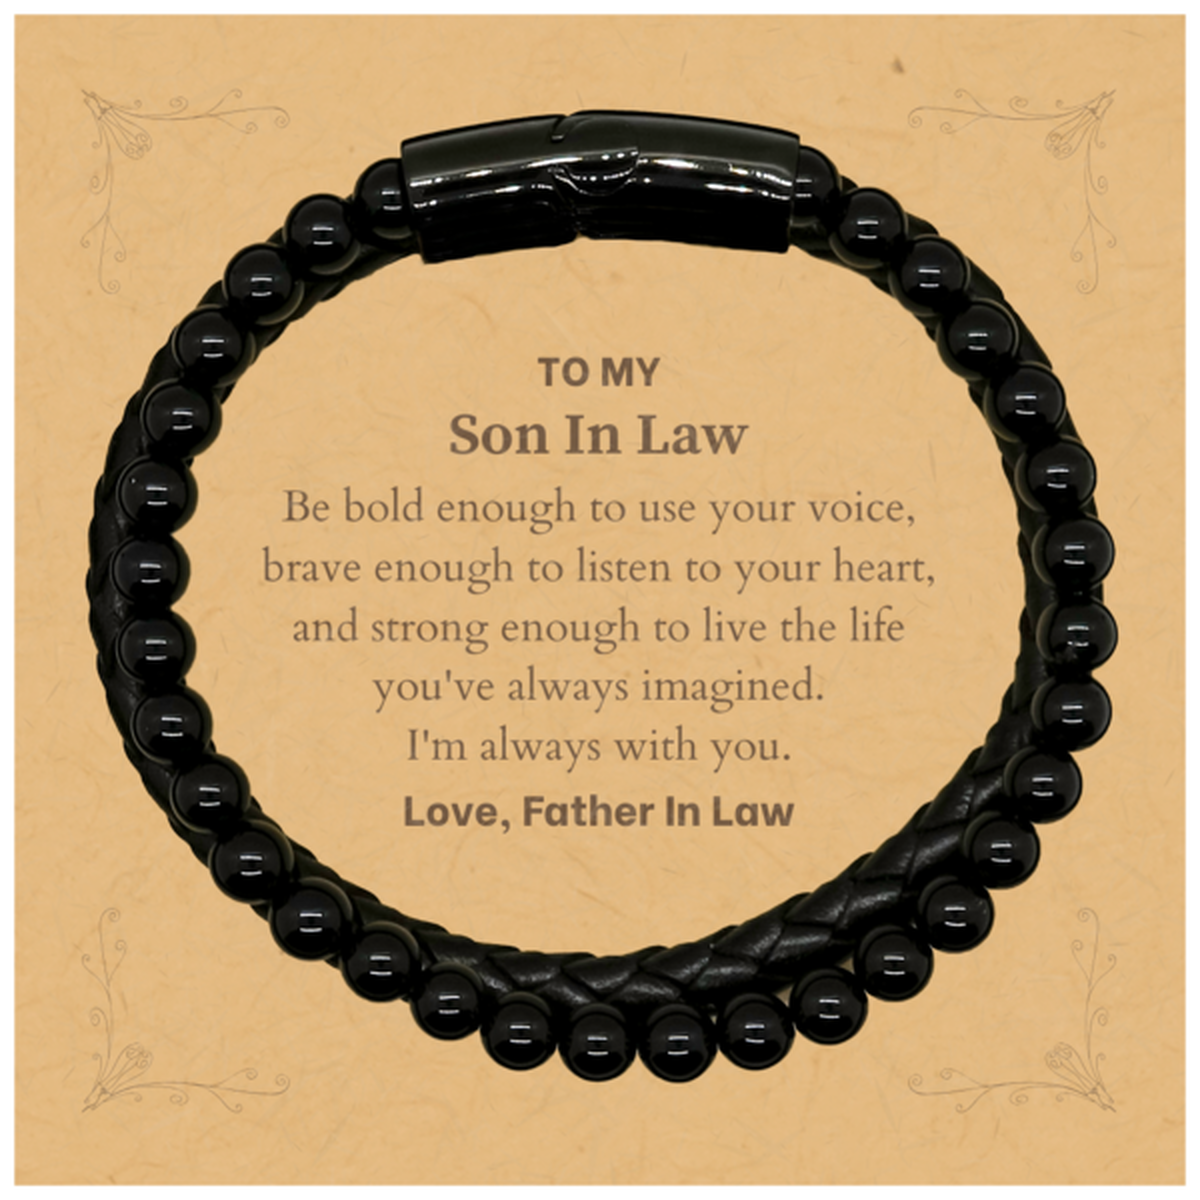 Keepsake Son In Law Stone Leather Bracelets Gift Idea Graduation Christmas Birthday Son In Law from Father In Law, Son In Law Be bold enough to use your voice, brave enough to listen to your heart. Love, Father In Law